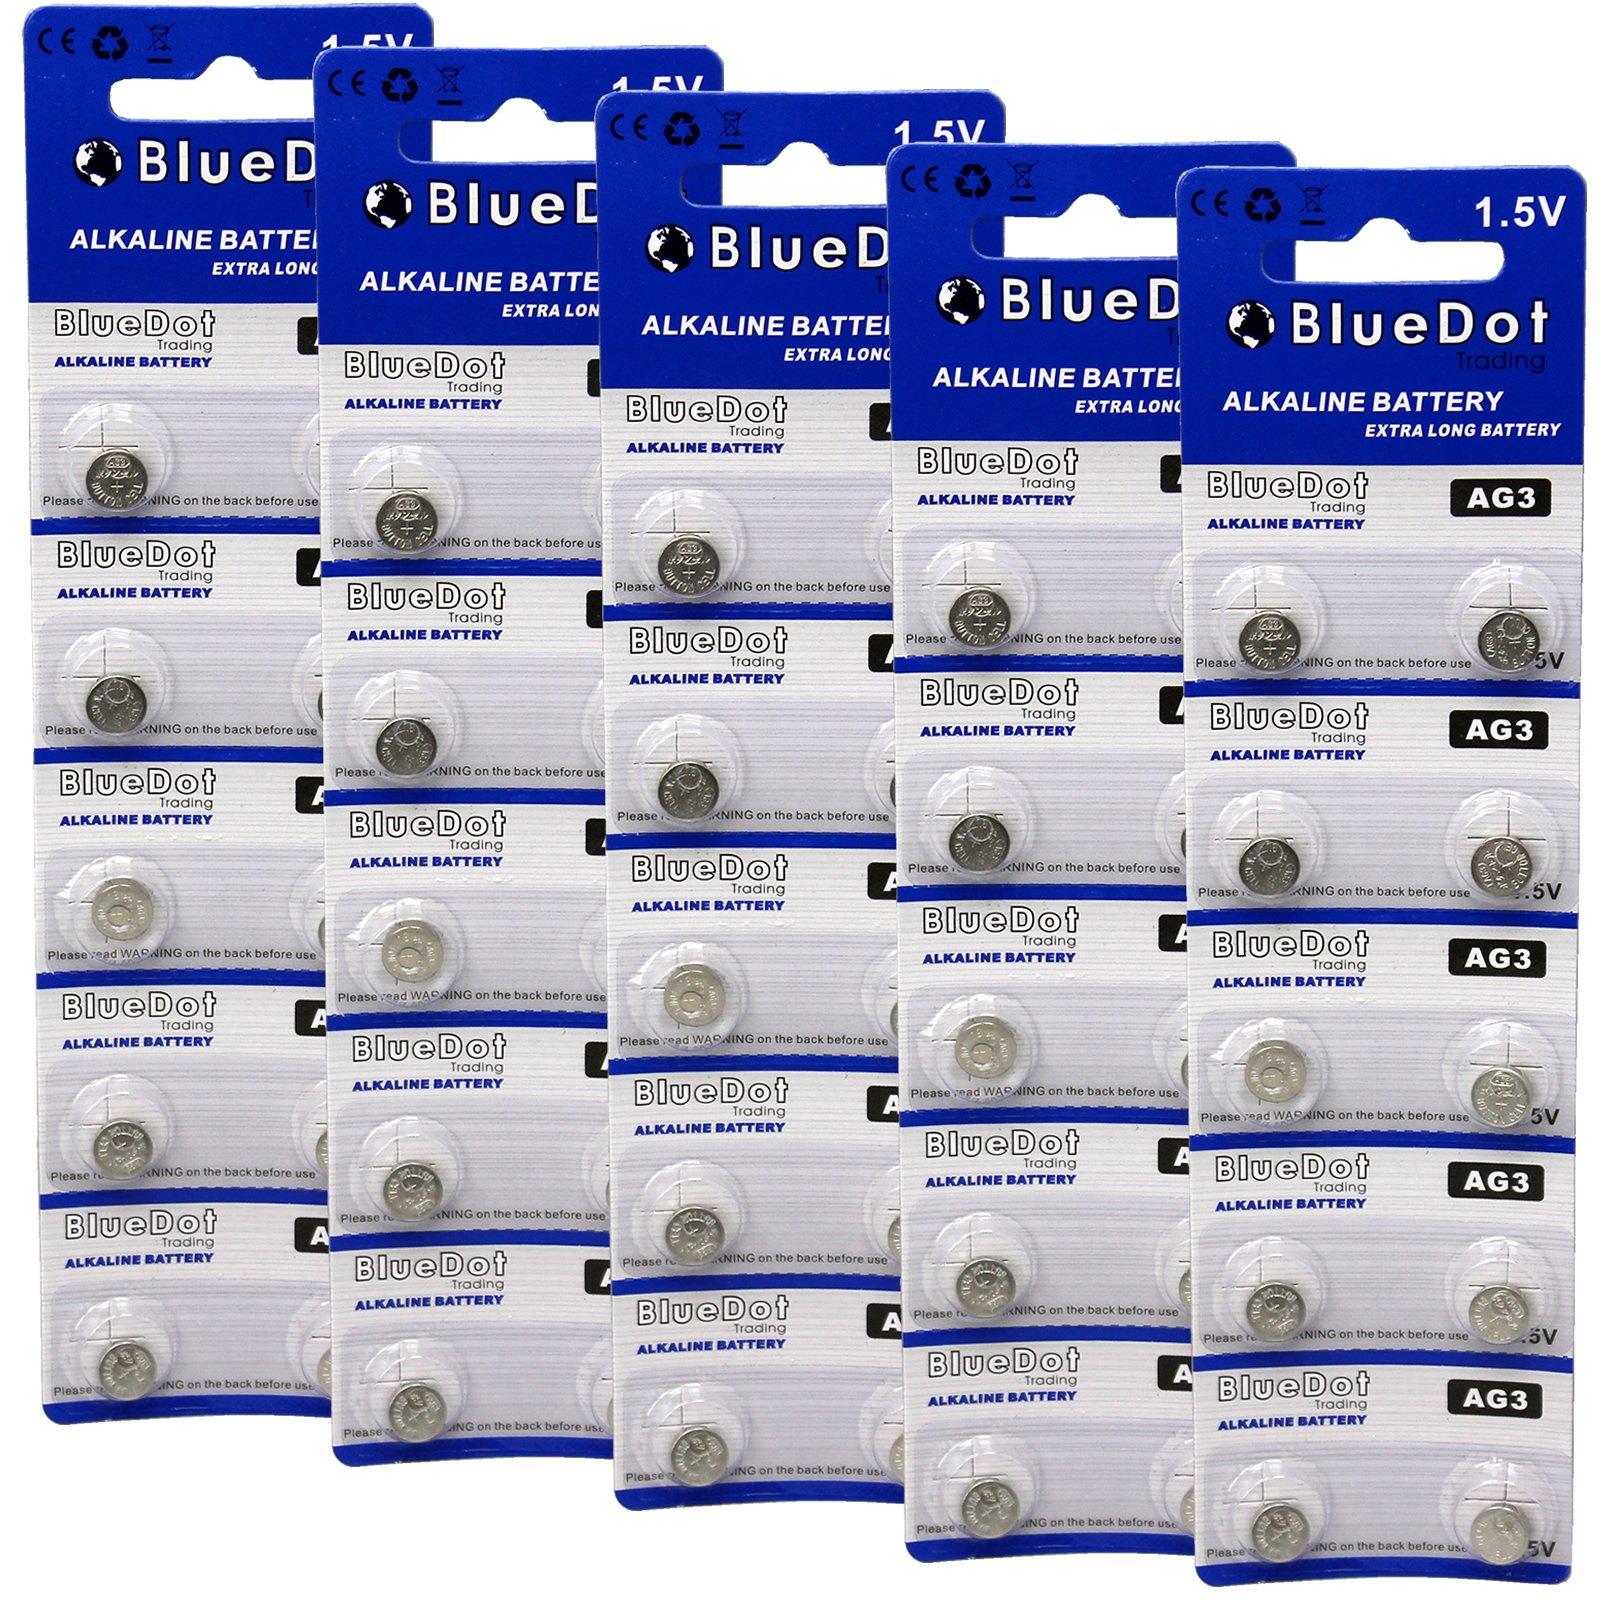 BlueDot Trading AG3 LR41 SR41 392 196 Alkaline Button Coin Cell 1.55v Battery for Watches, Calculators, Toys, Other Electronic Products, Quantity 50 pcs-Pack